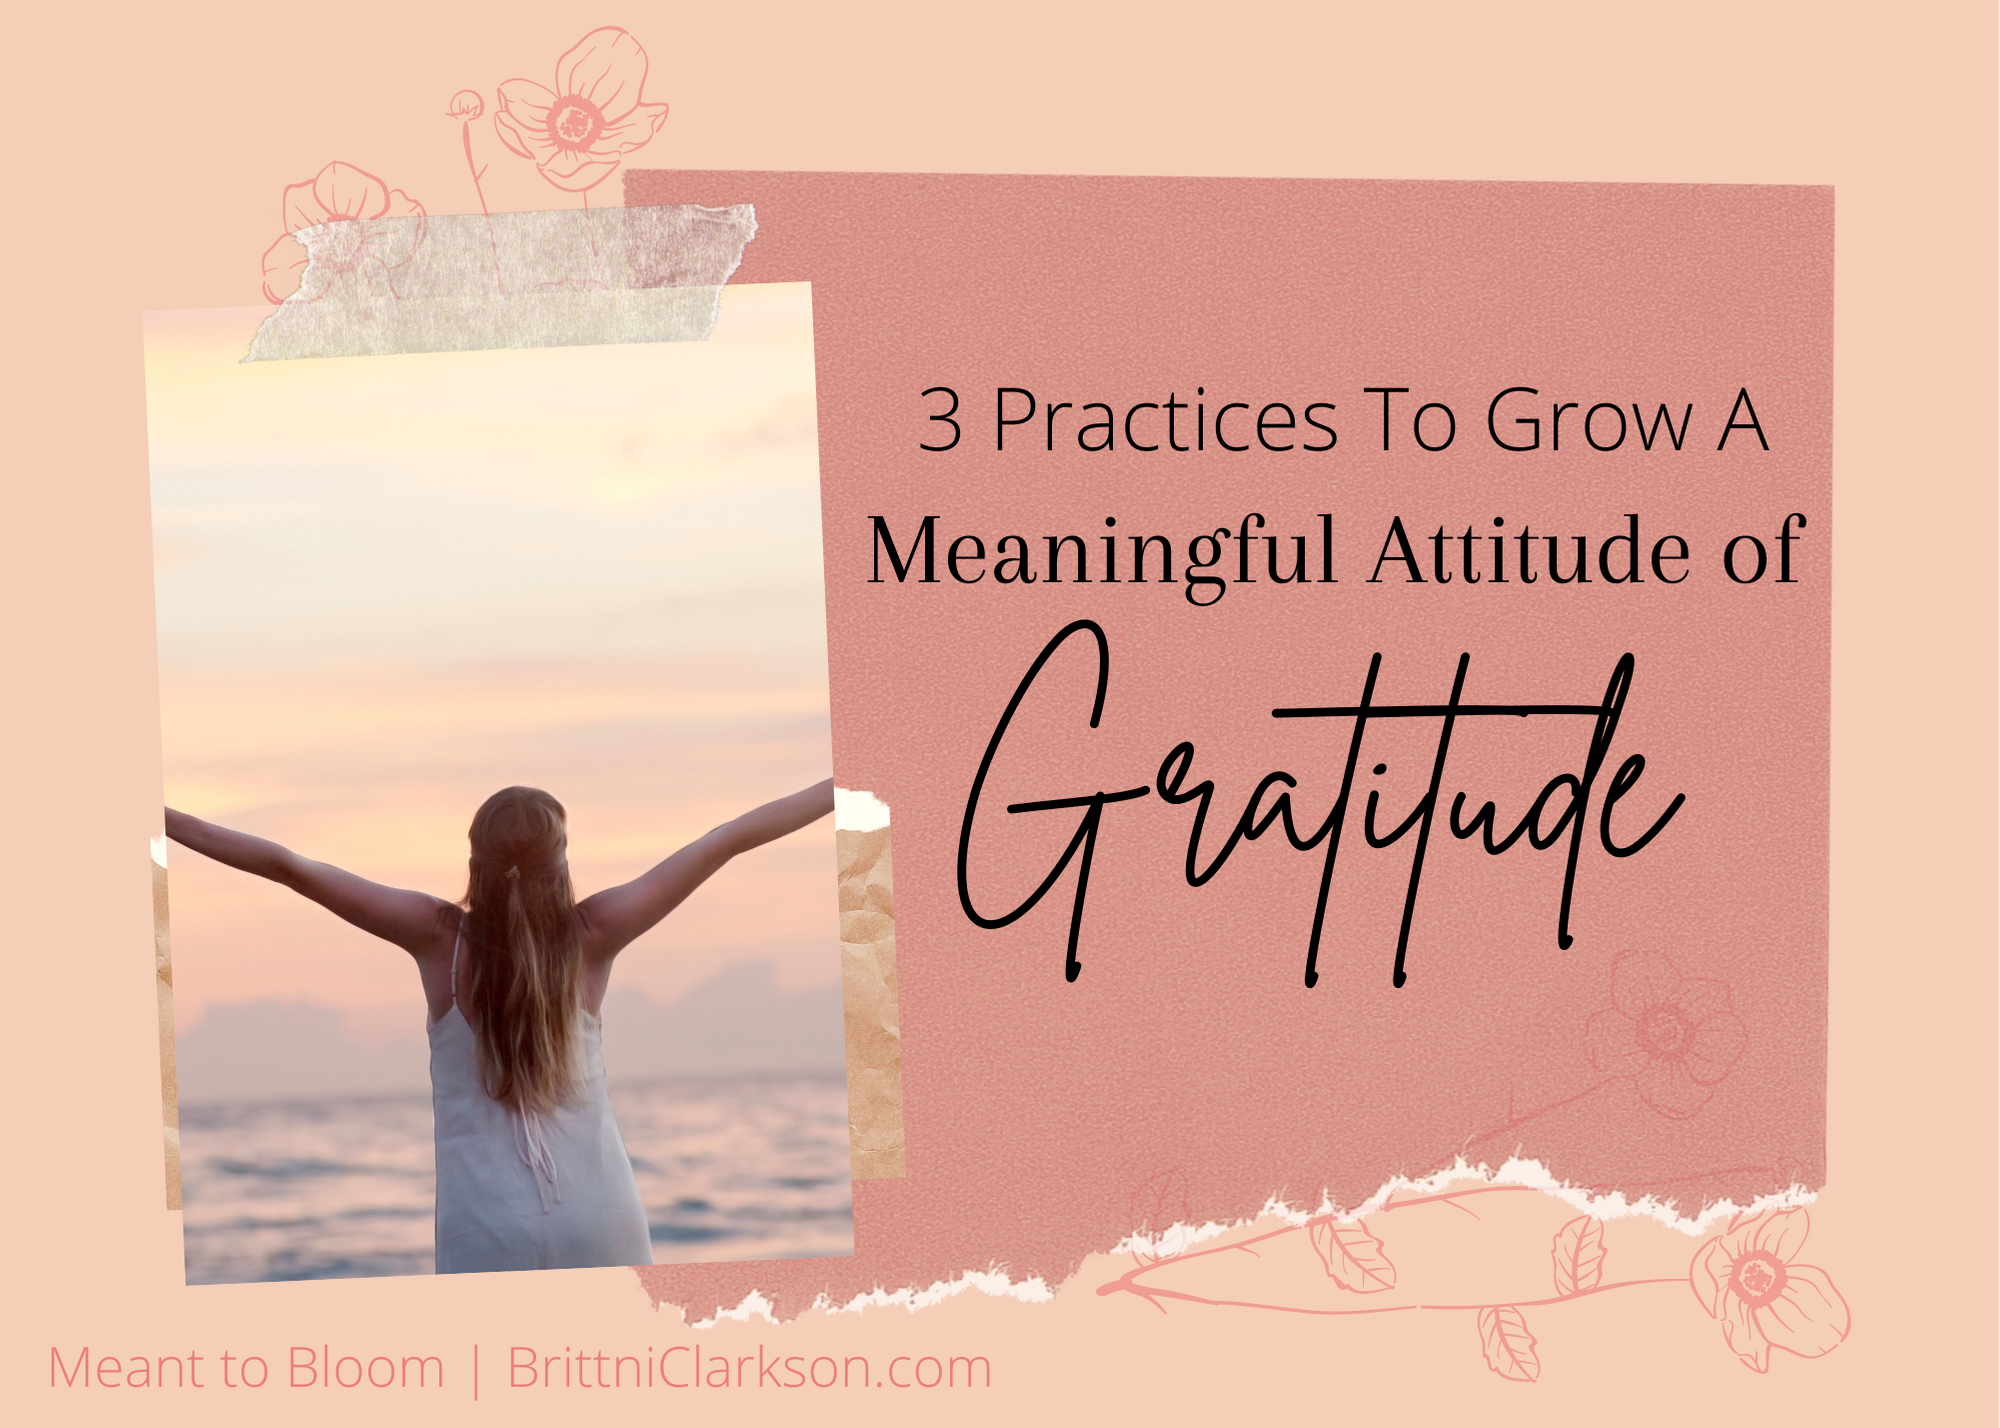 How to Grow a Meaningful Attitude of Gratitude